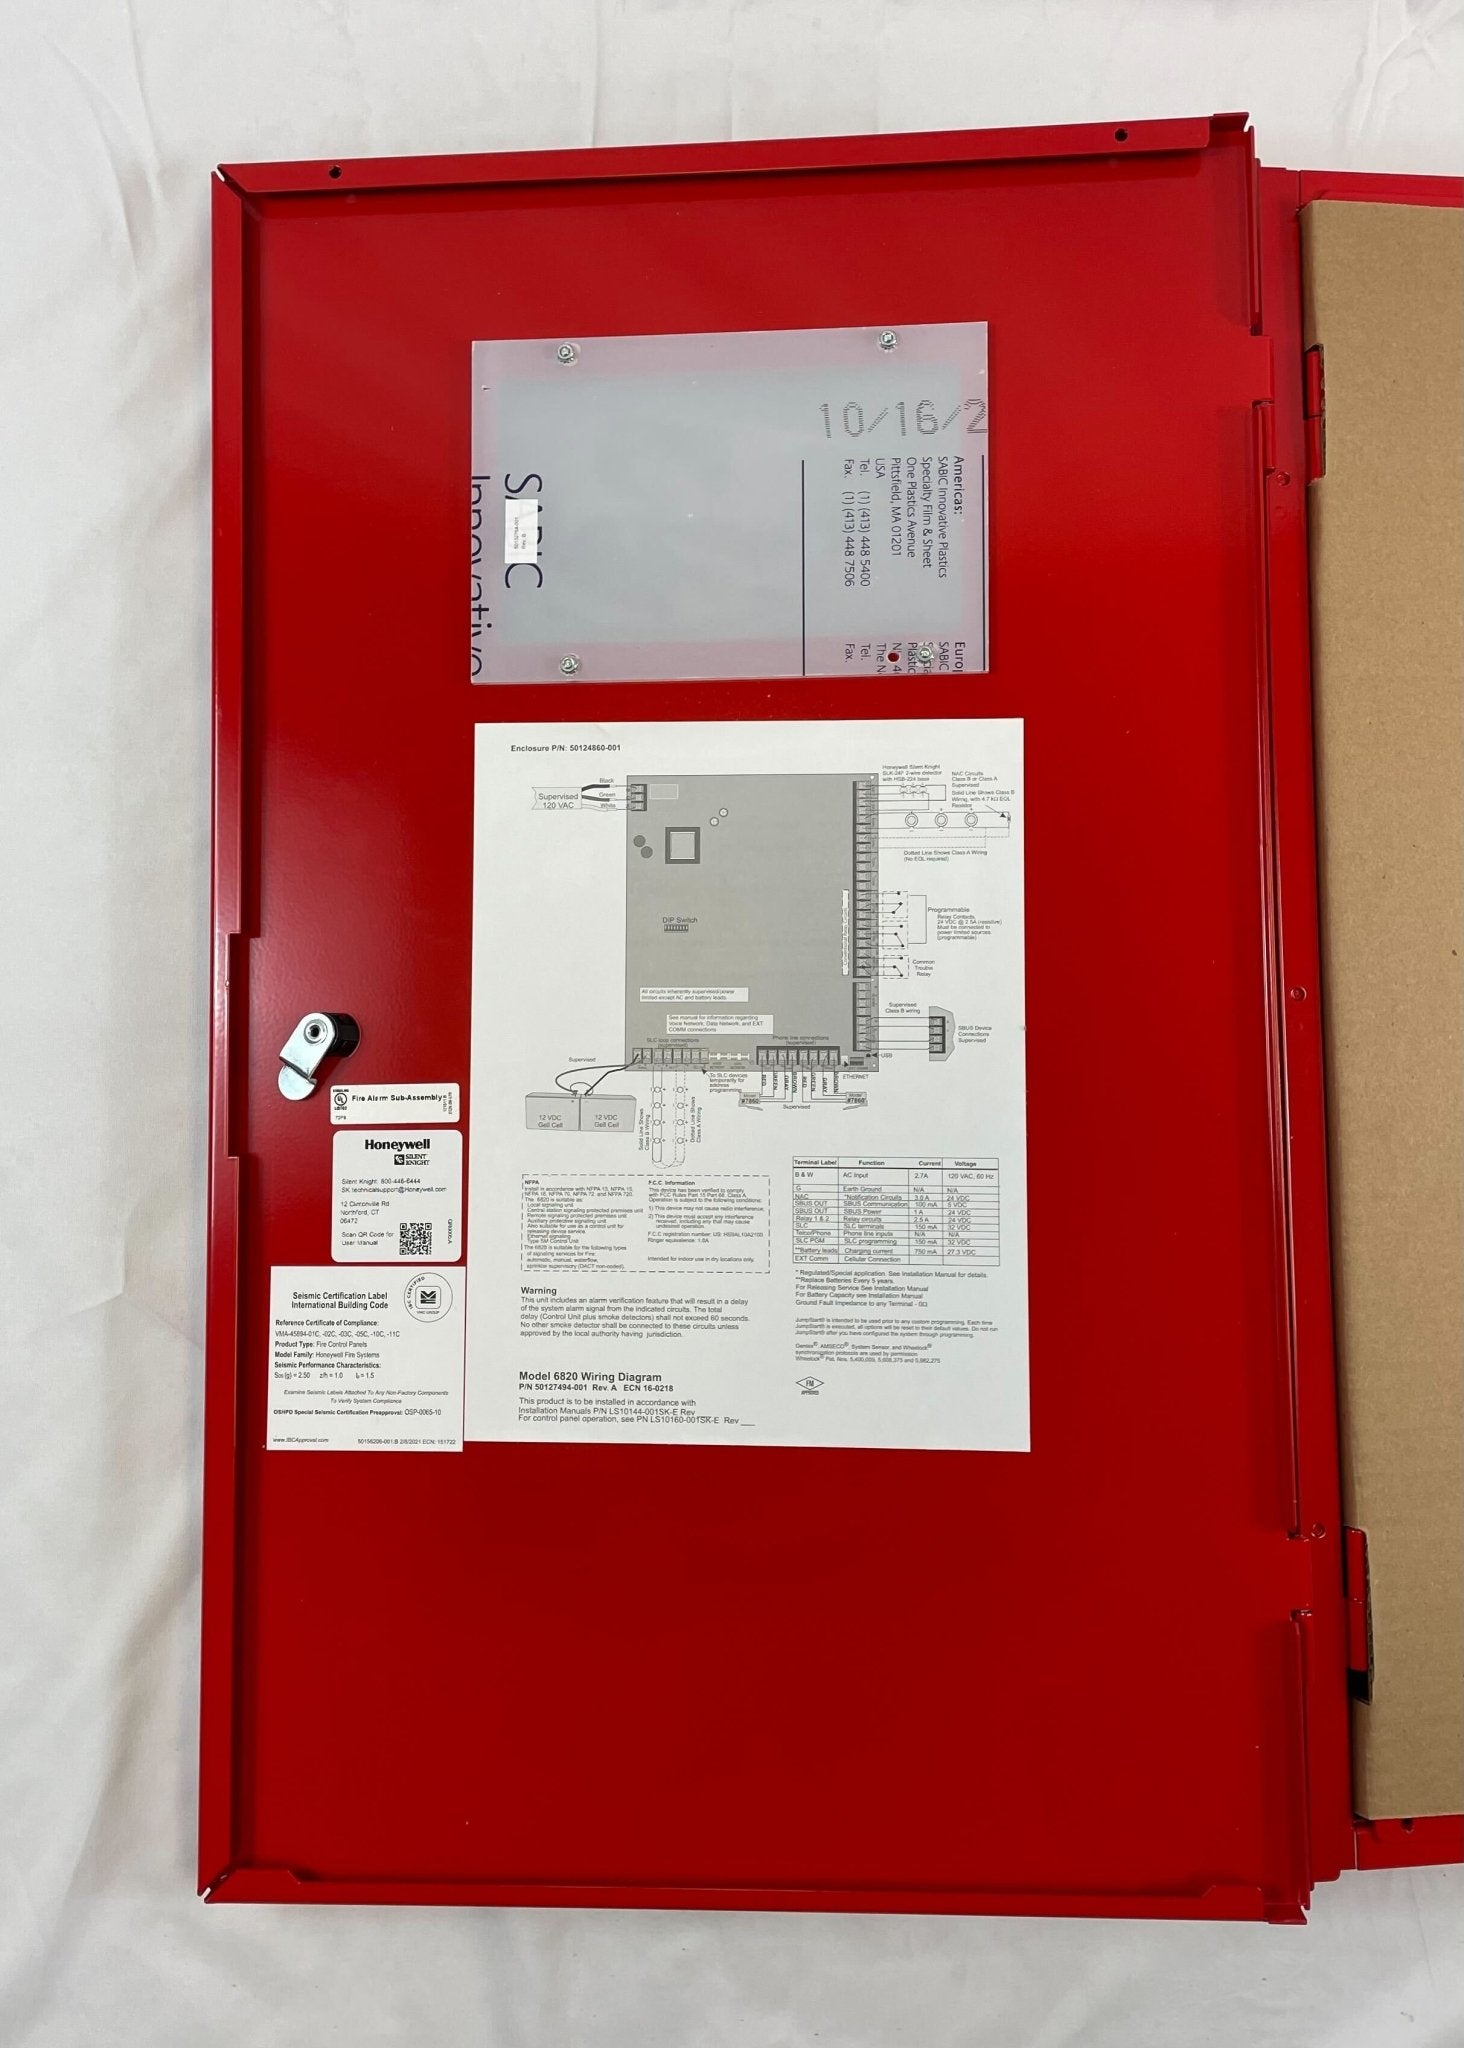 Silent Knight 006820CB - The Fire Alarm Supplier